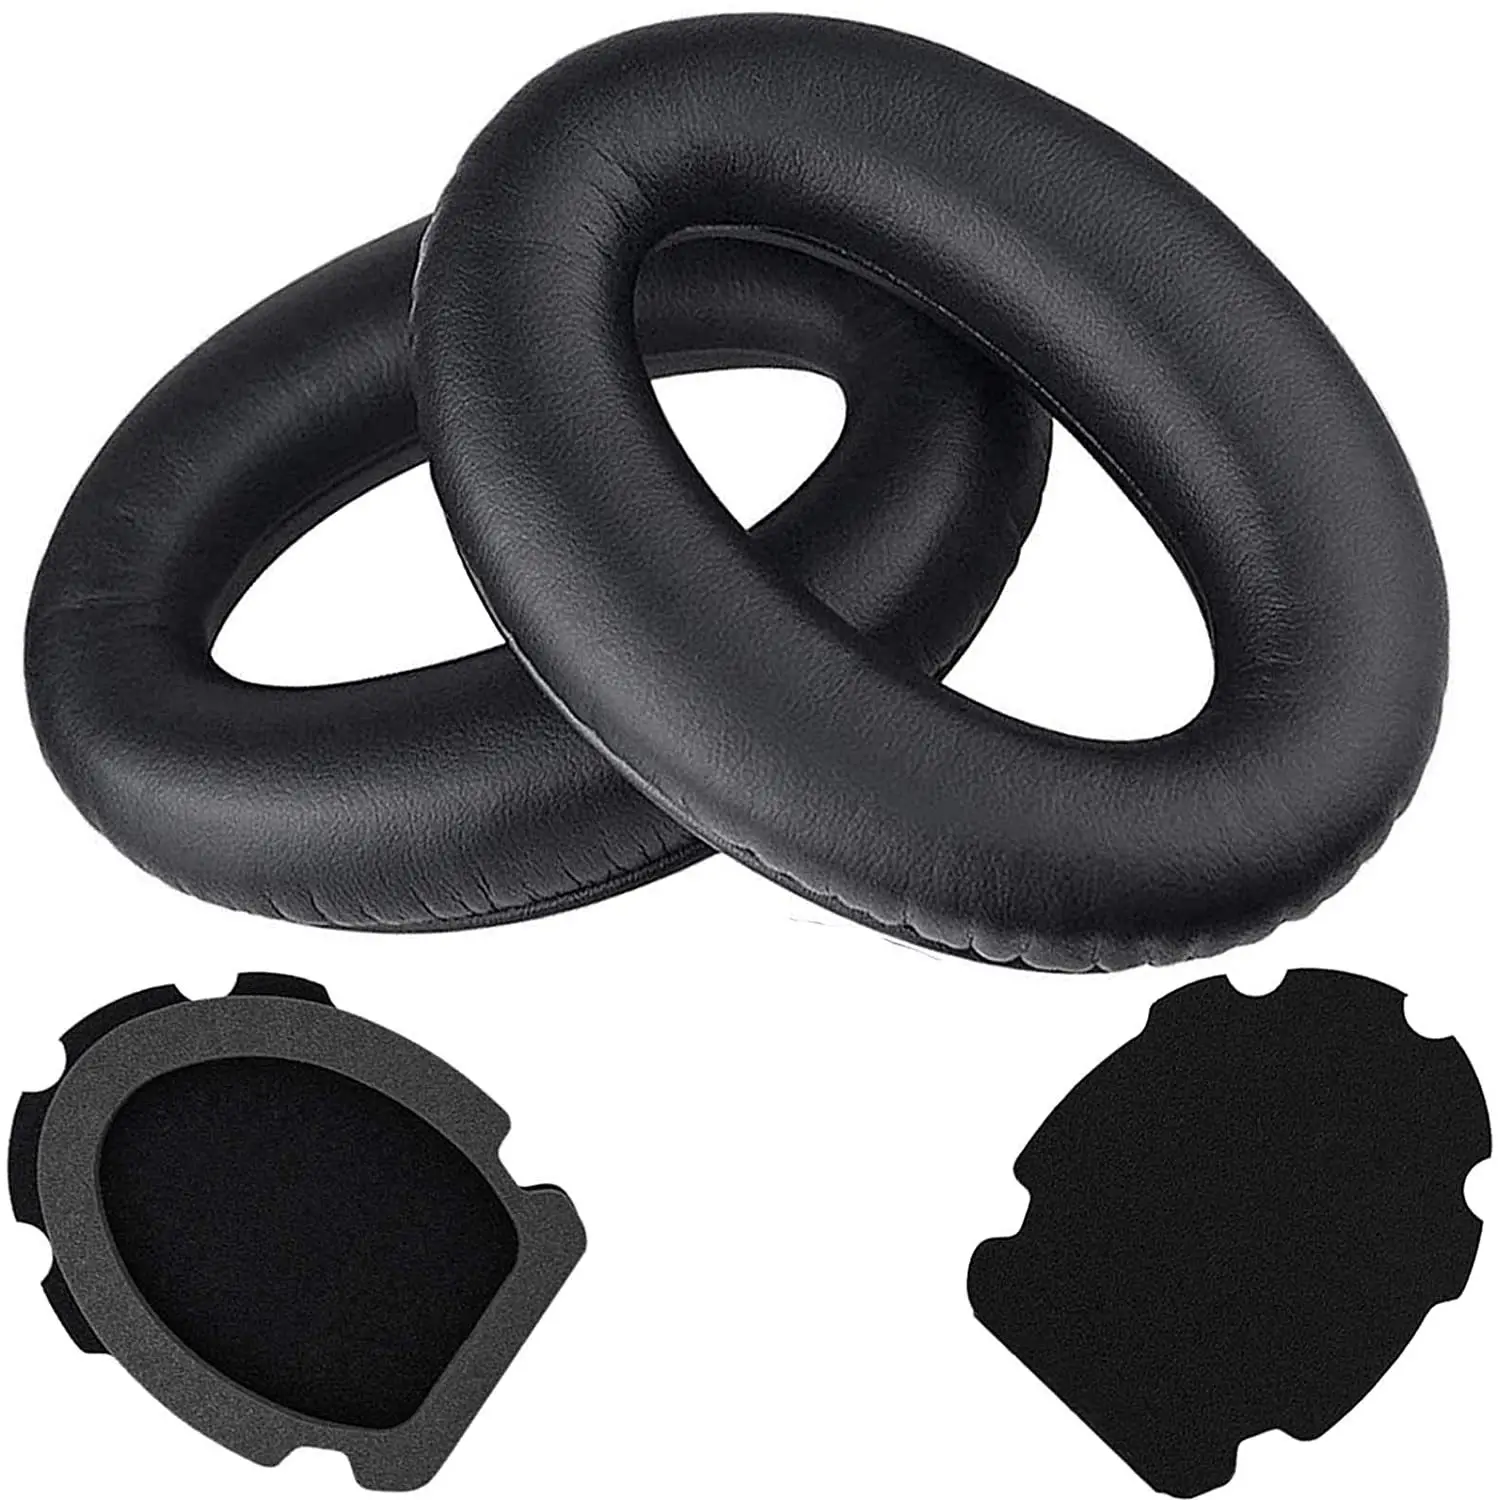 

High Quality Earpads For Bose Aviation Headset X A10 A20 Headphones Replacement Ear Pads Cushions Soft Memory Sponge Cover